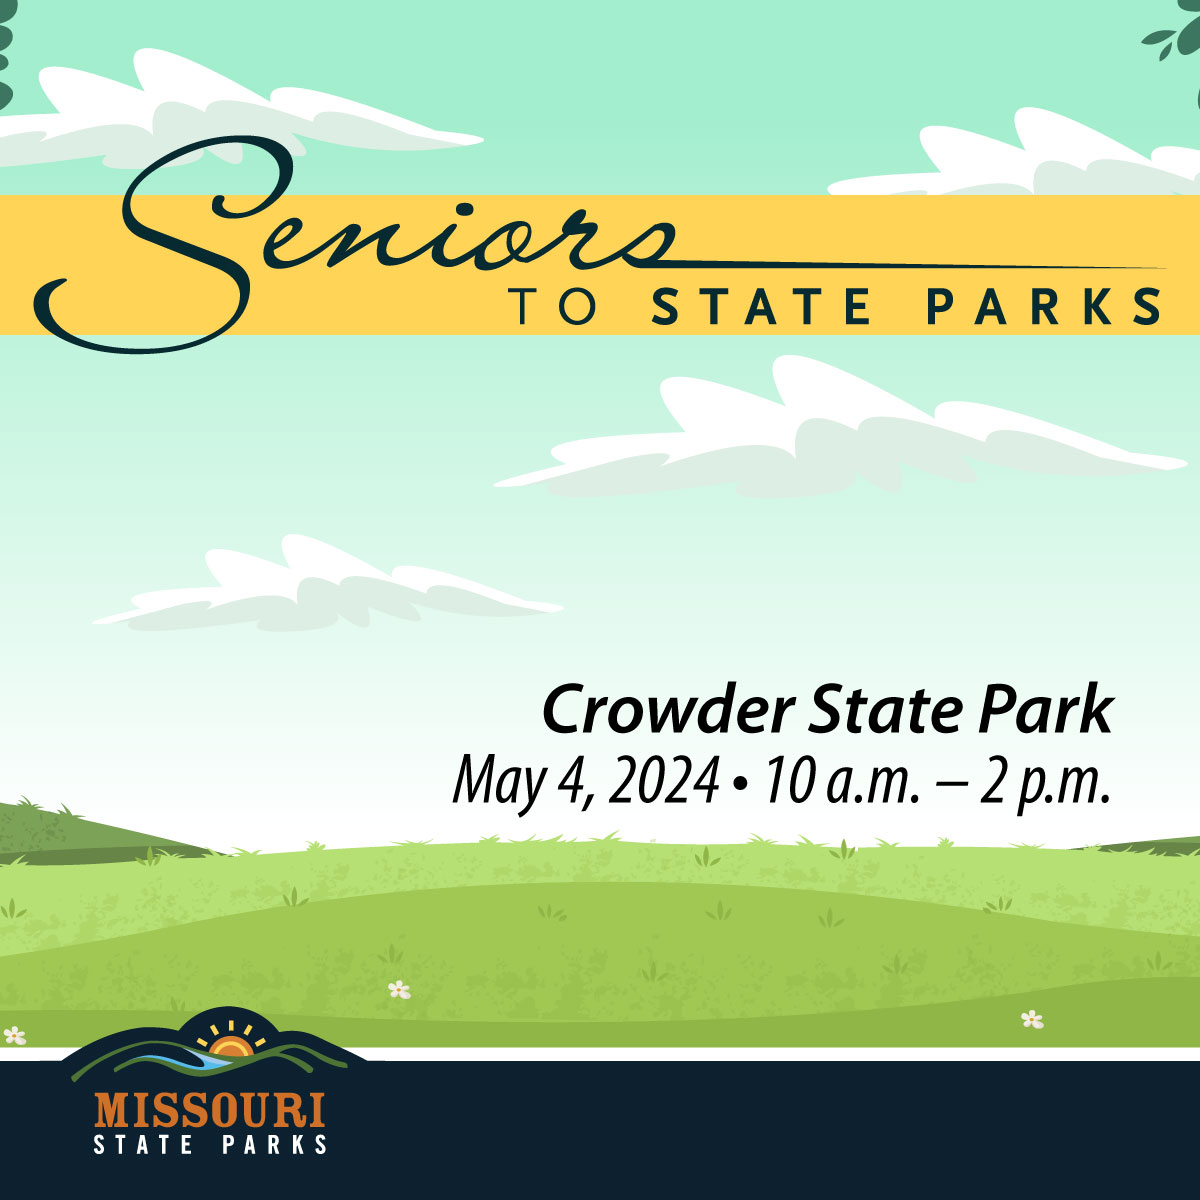 Crowder State Park hosts its “Seniors to Parks” next Saturday, May 4. Learn more about the activities planned and register at ow.ly/fCcx50Rjmnn .